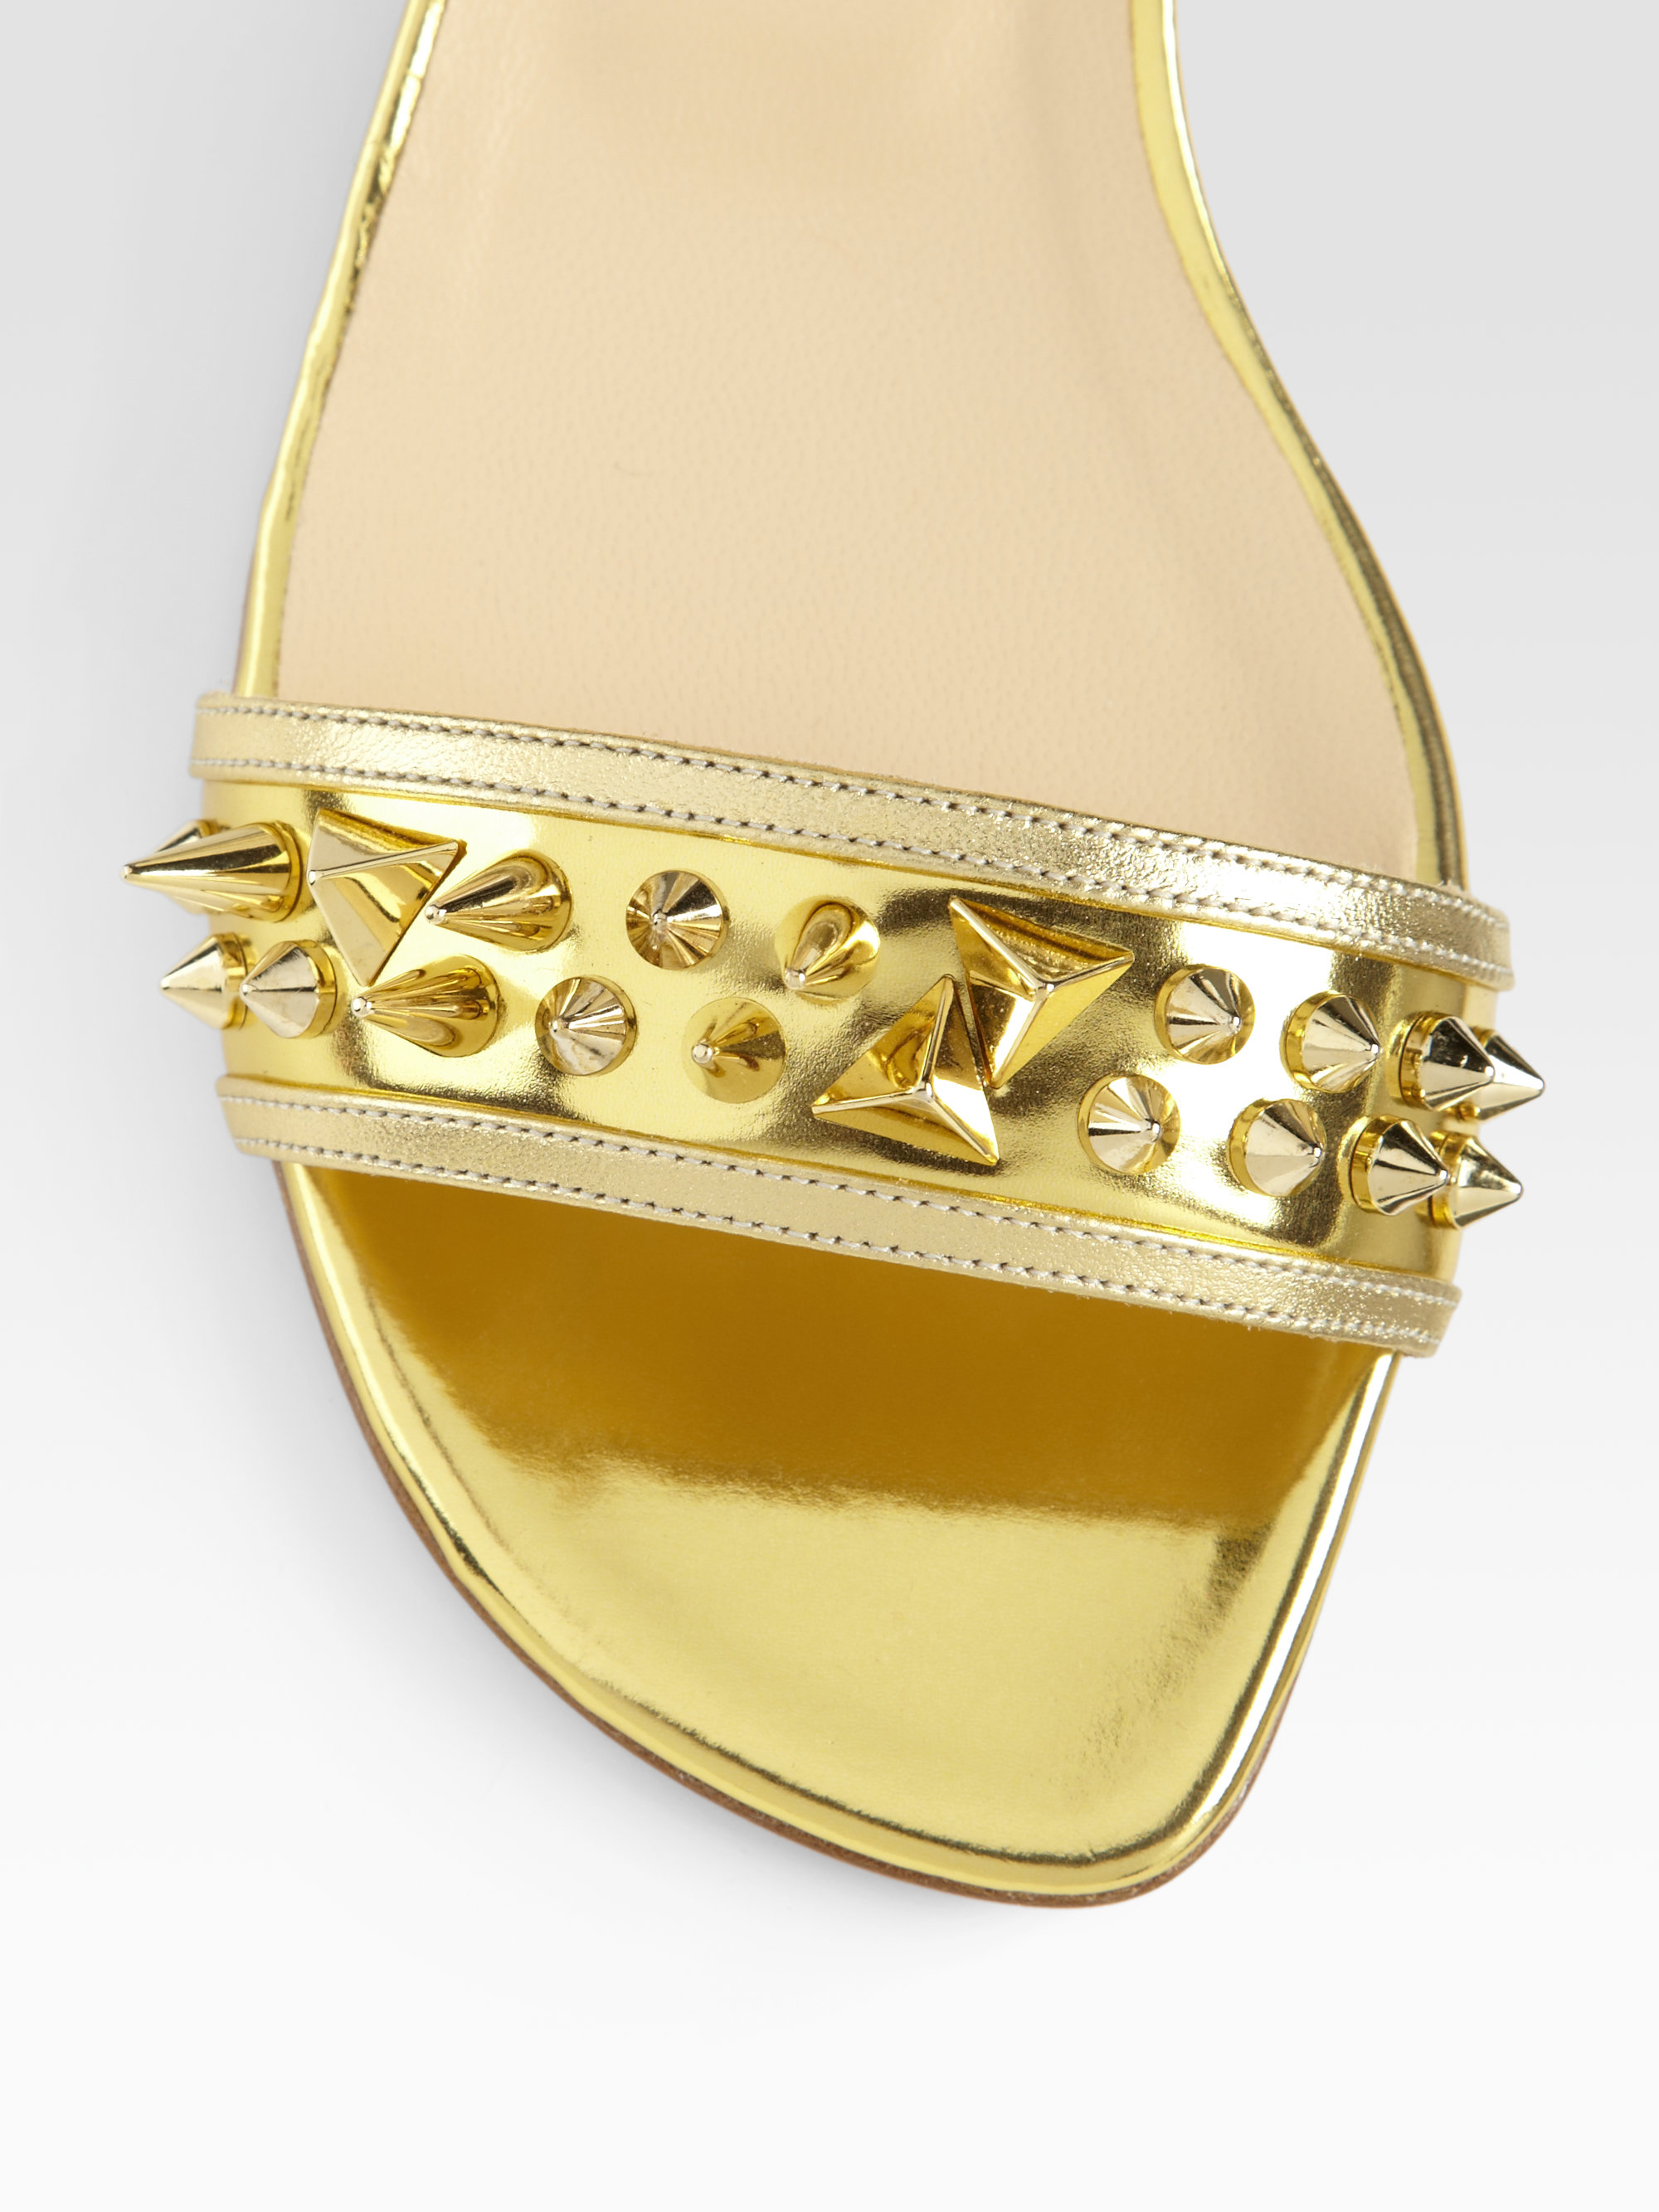 christian louboutin thong sandals Yellow patent leather trim | The ...